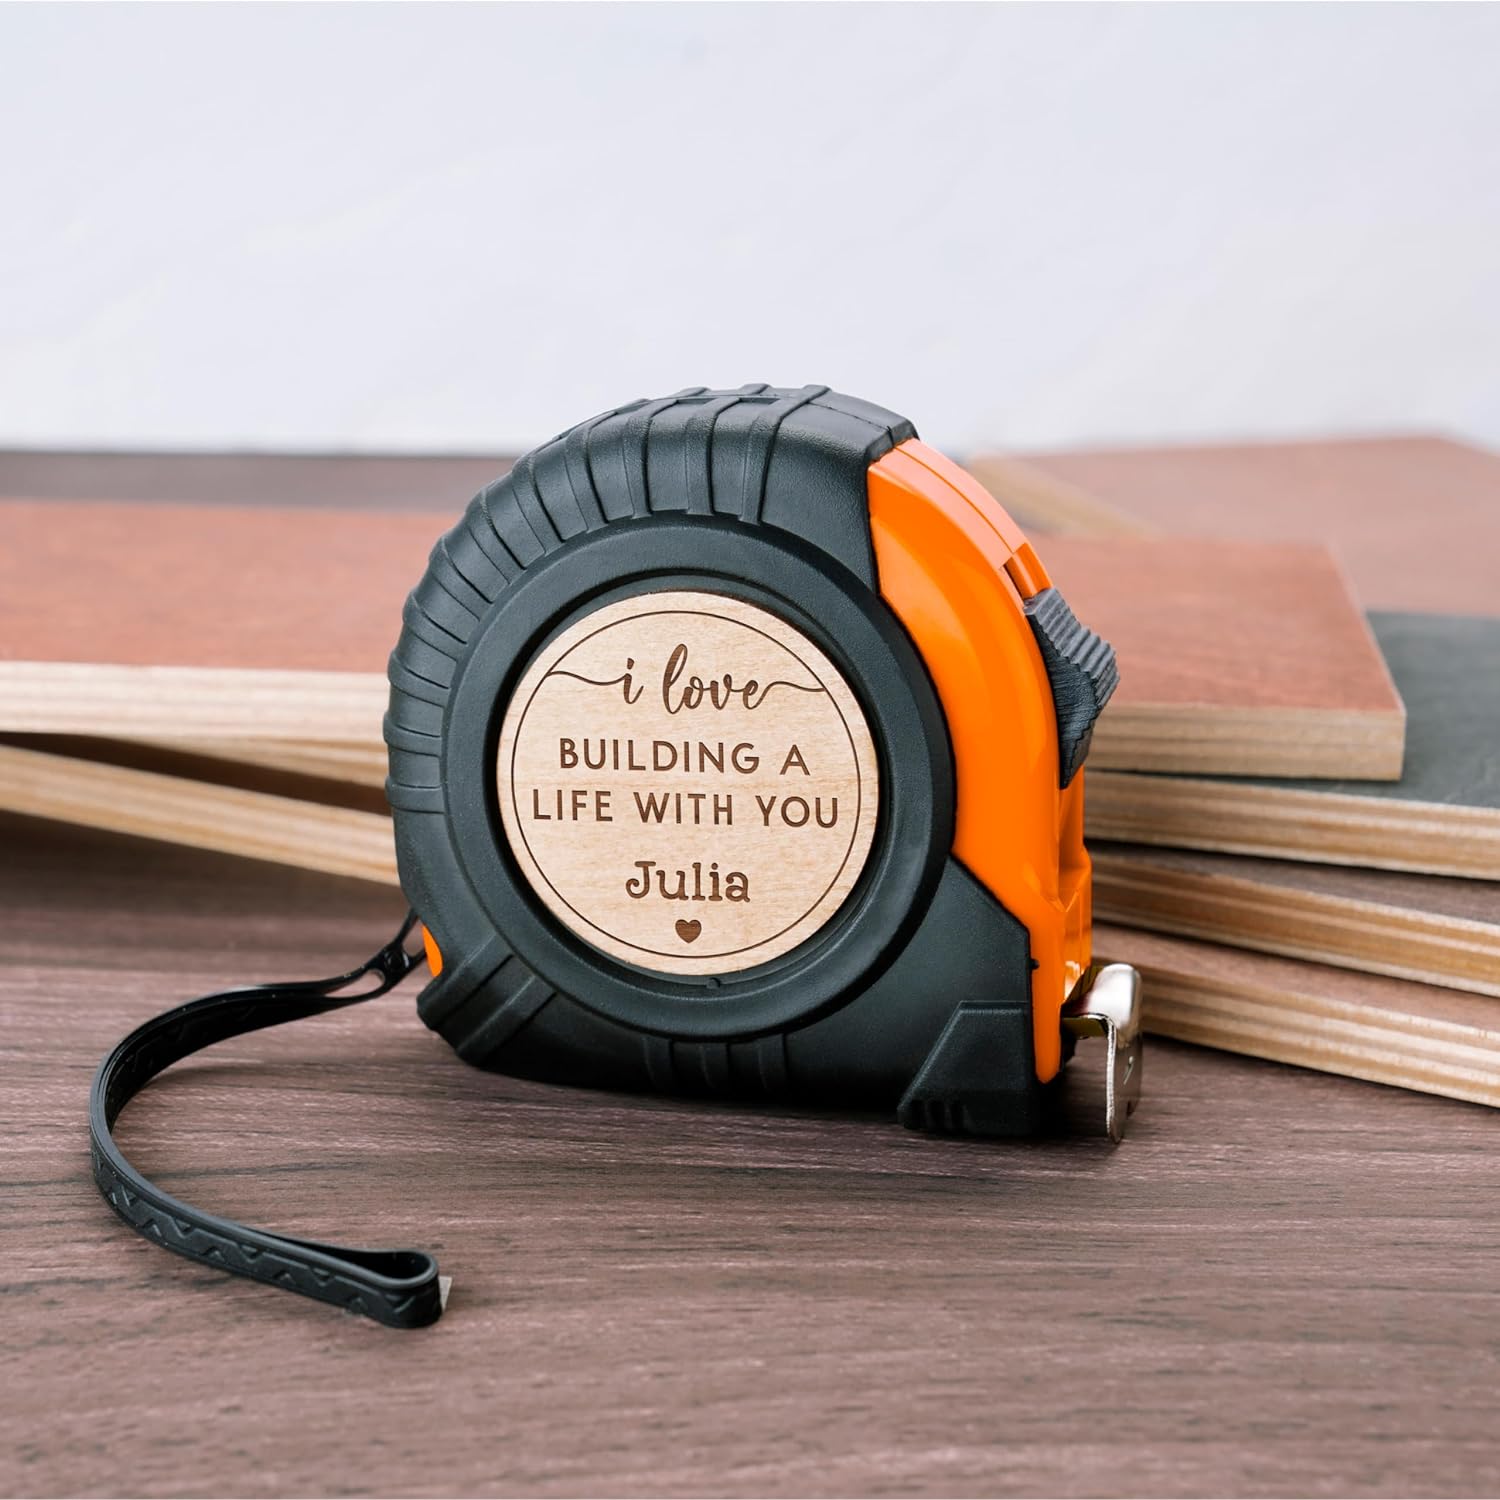 Tape Measure Personalized for Boyfriend, Husband, Men, I Love Building Life with You, 2 Optional Sizes, Gifts for Men, Custom Engraved Tape Measure, Valentines Gifts for Boyfriend